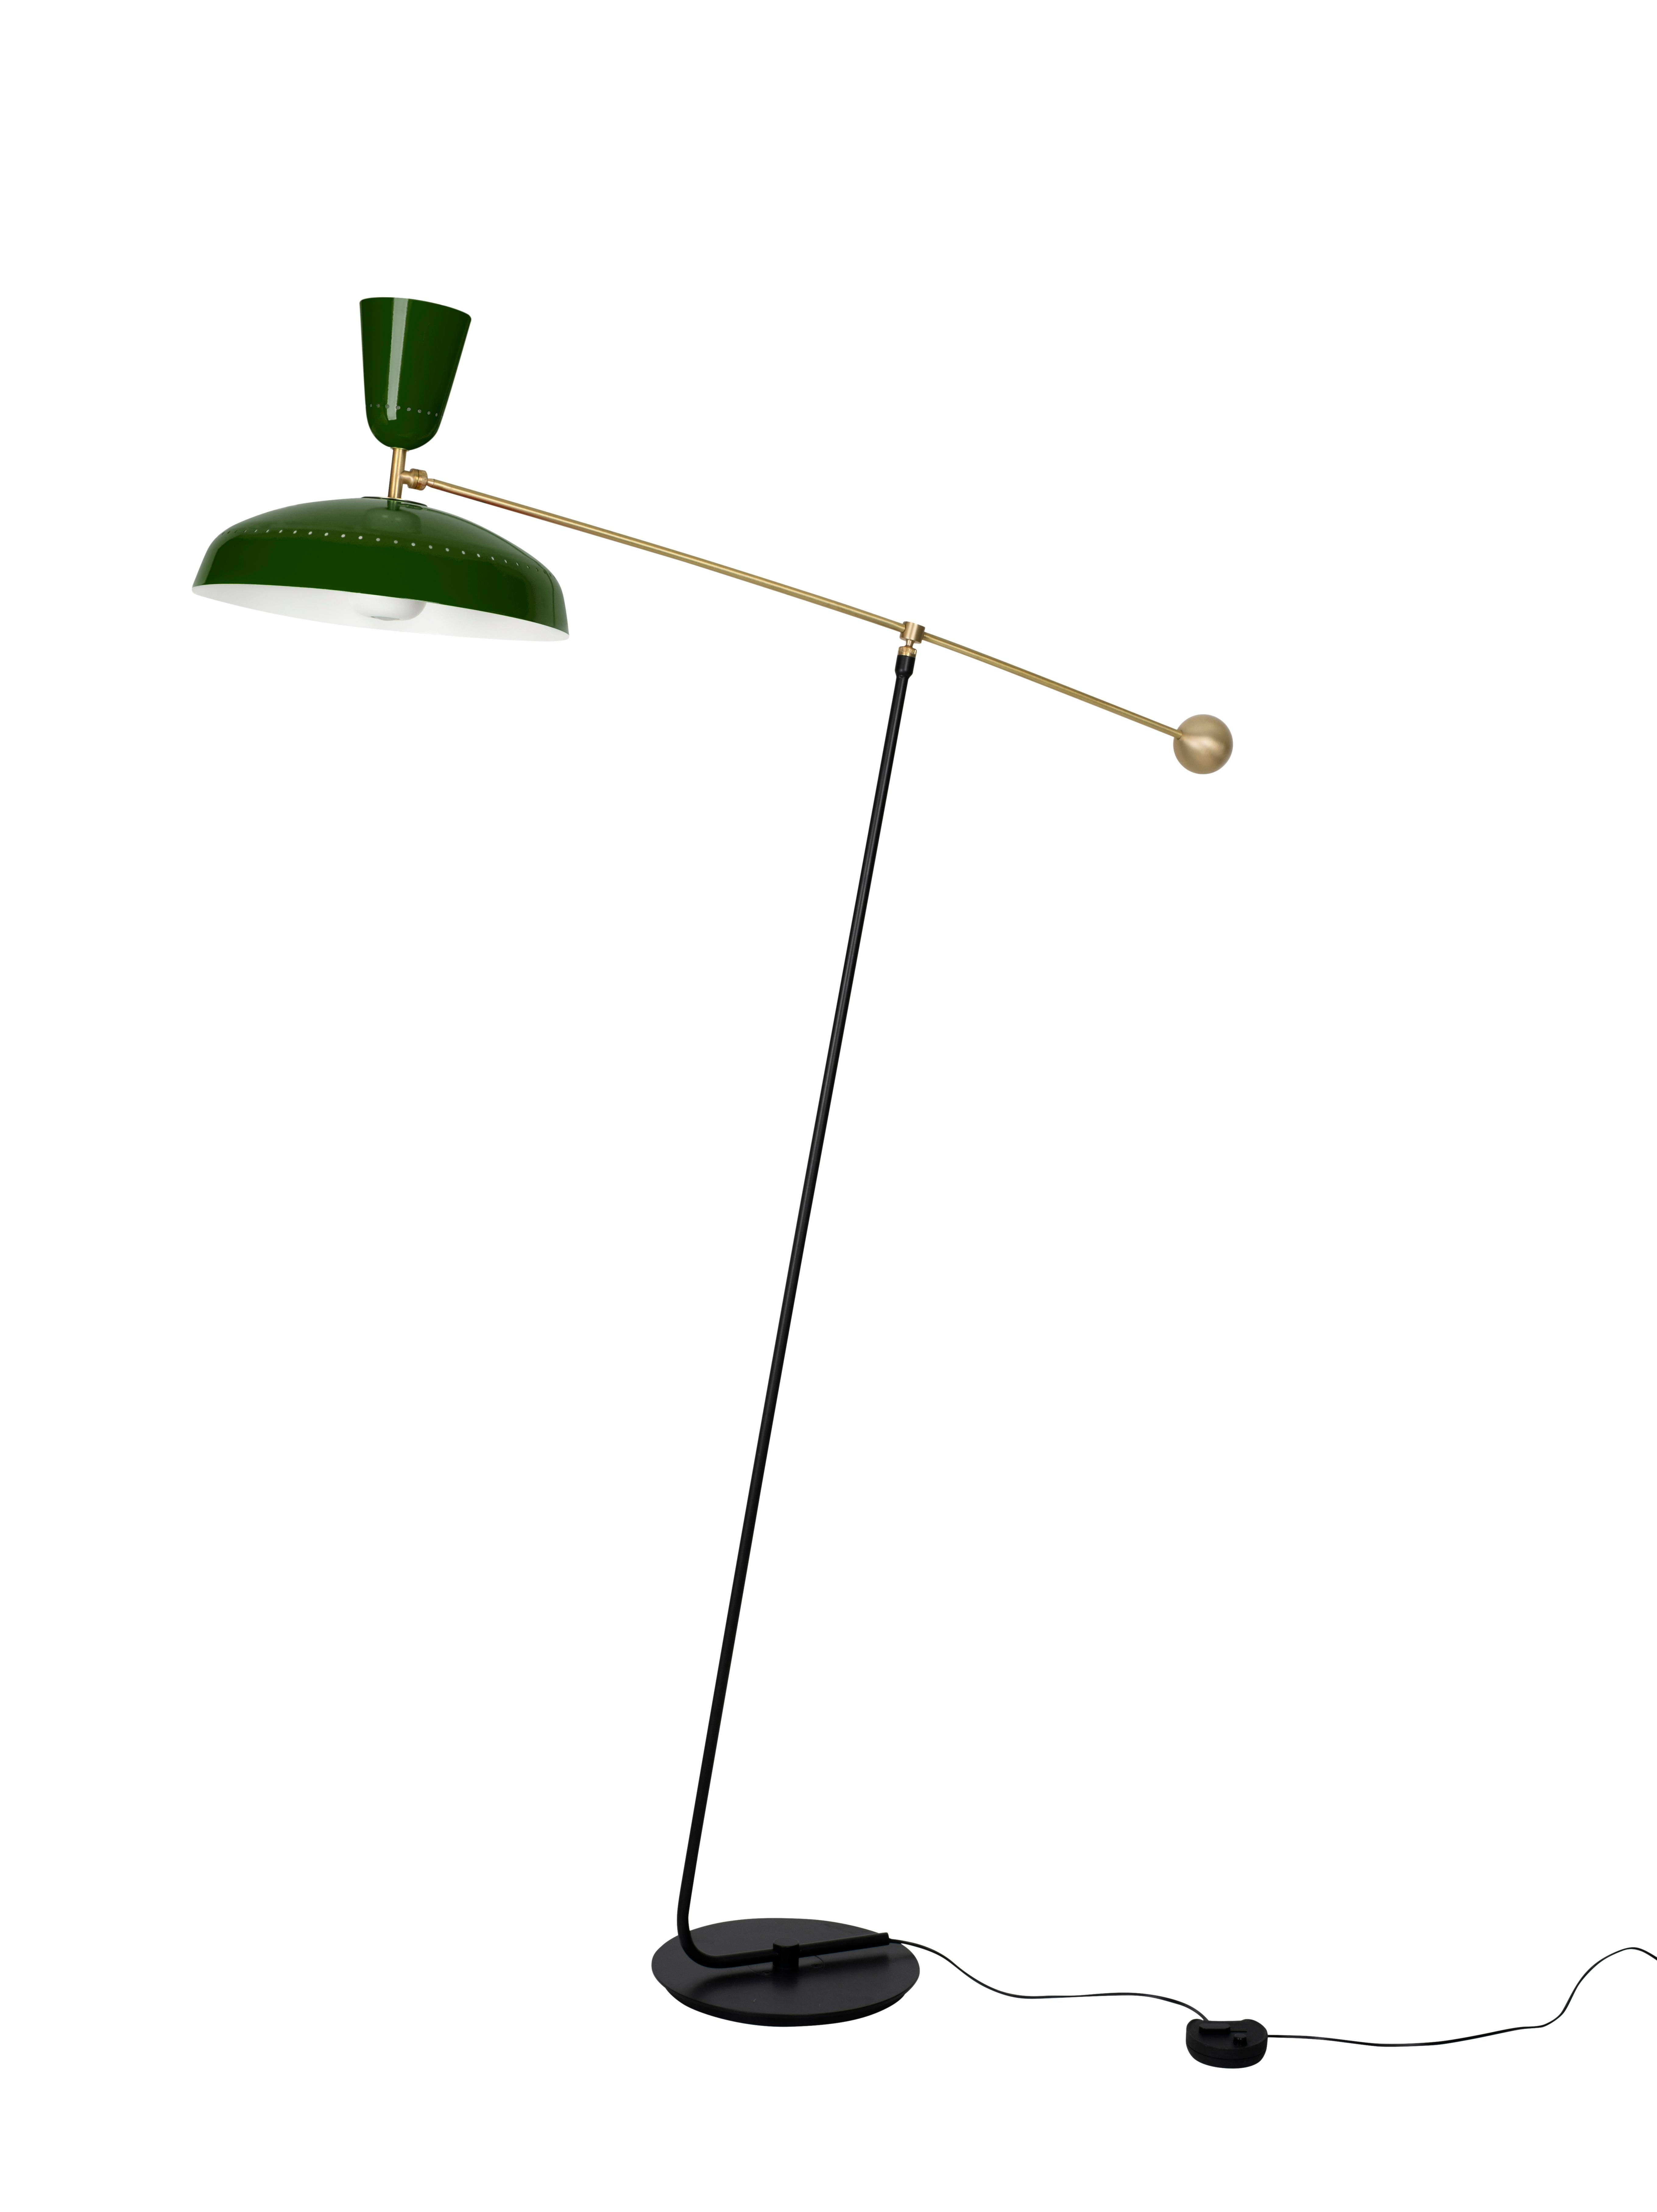 Large Pierre Guariche 'G1' Floor Lamp for Sammode Studio in White For Sale 3